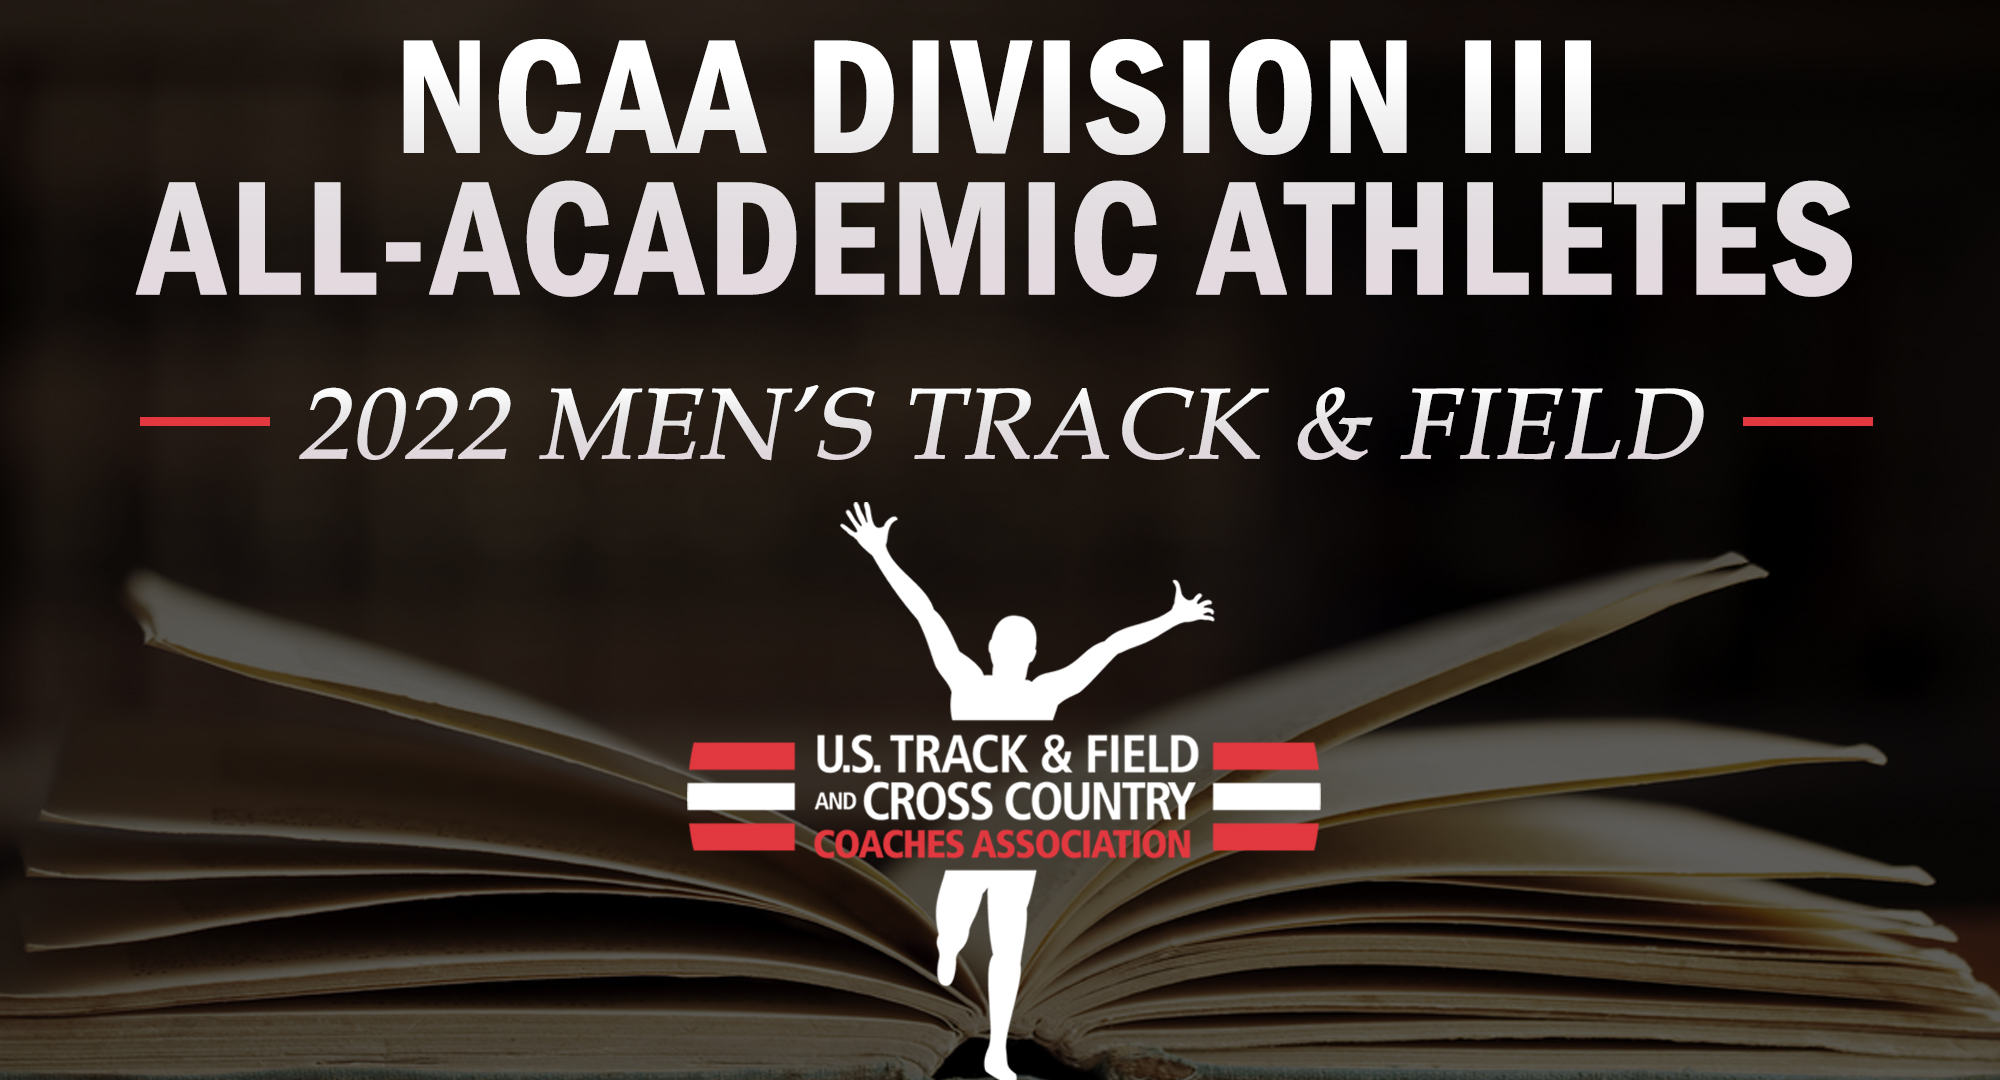 Concordia earned USTFCCCA All-Academic Team honors, and four student-athletes were named to the All-Academic List.